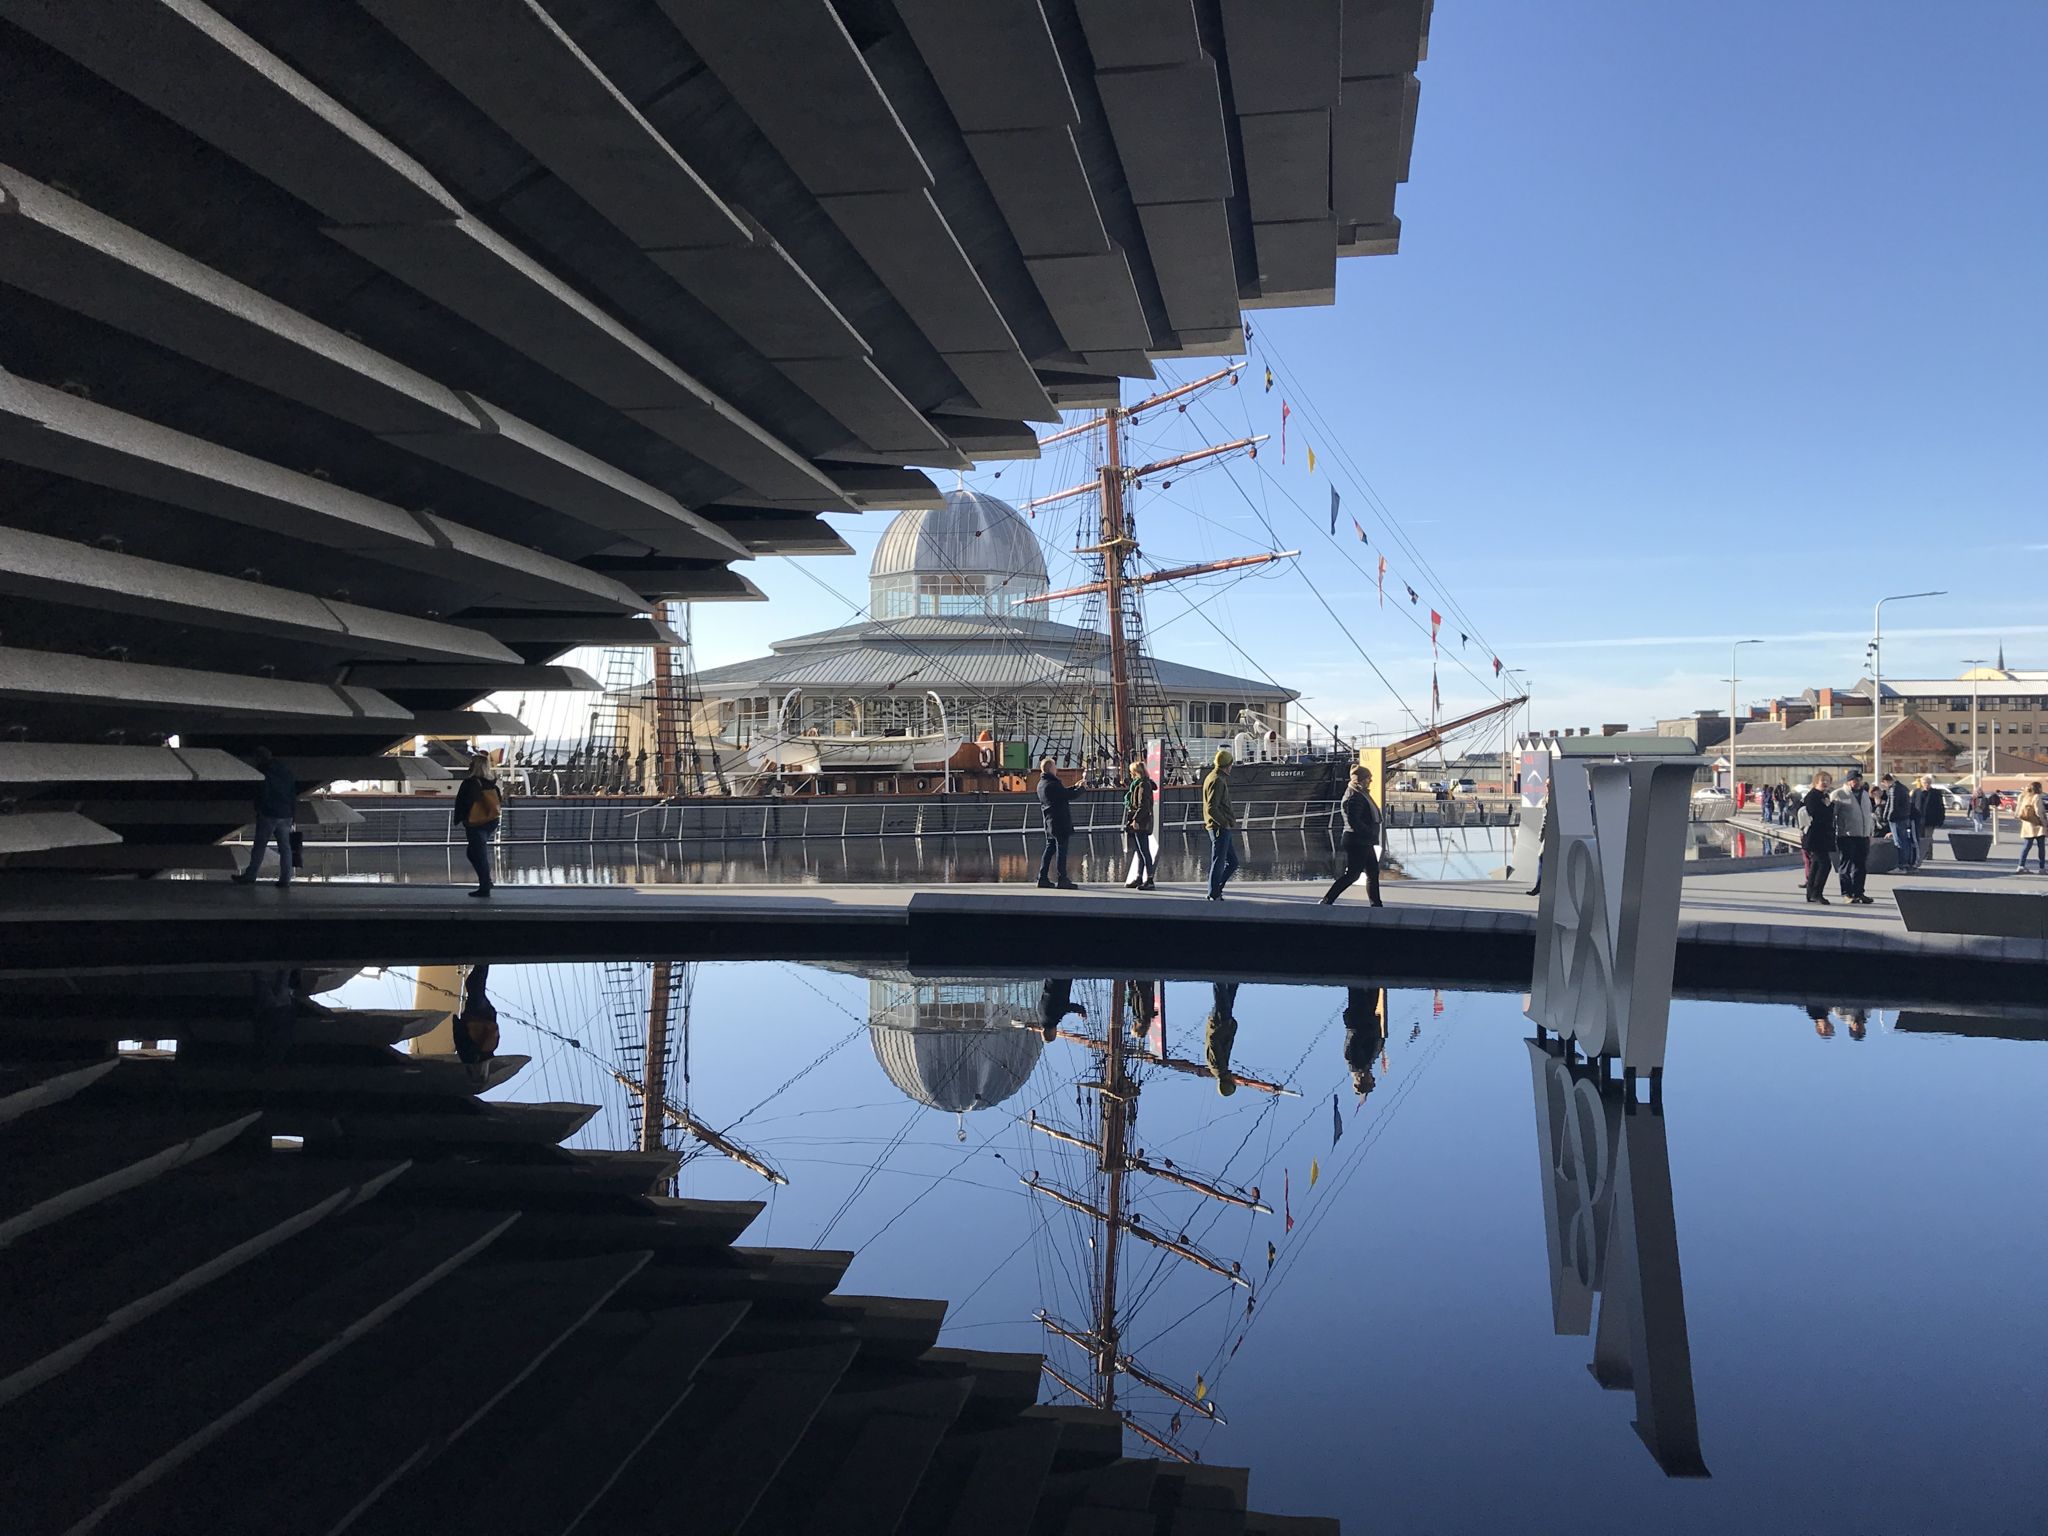 V&A in Dundee with the Discovery ship reflected in the water